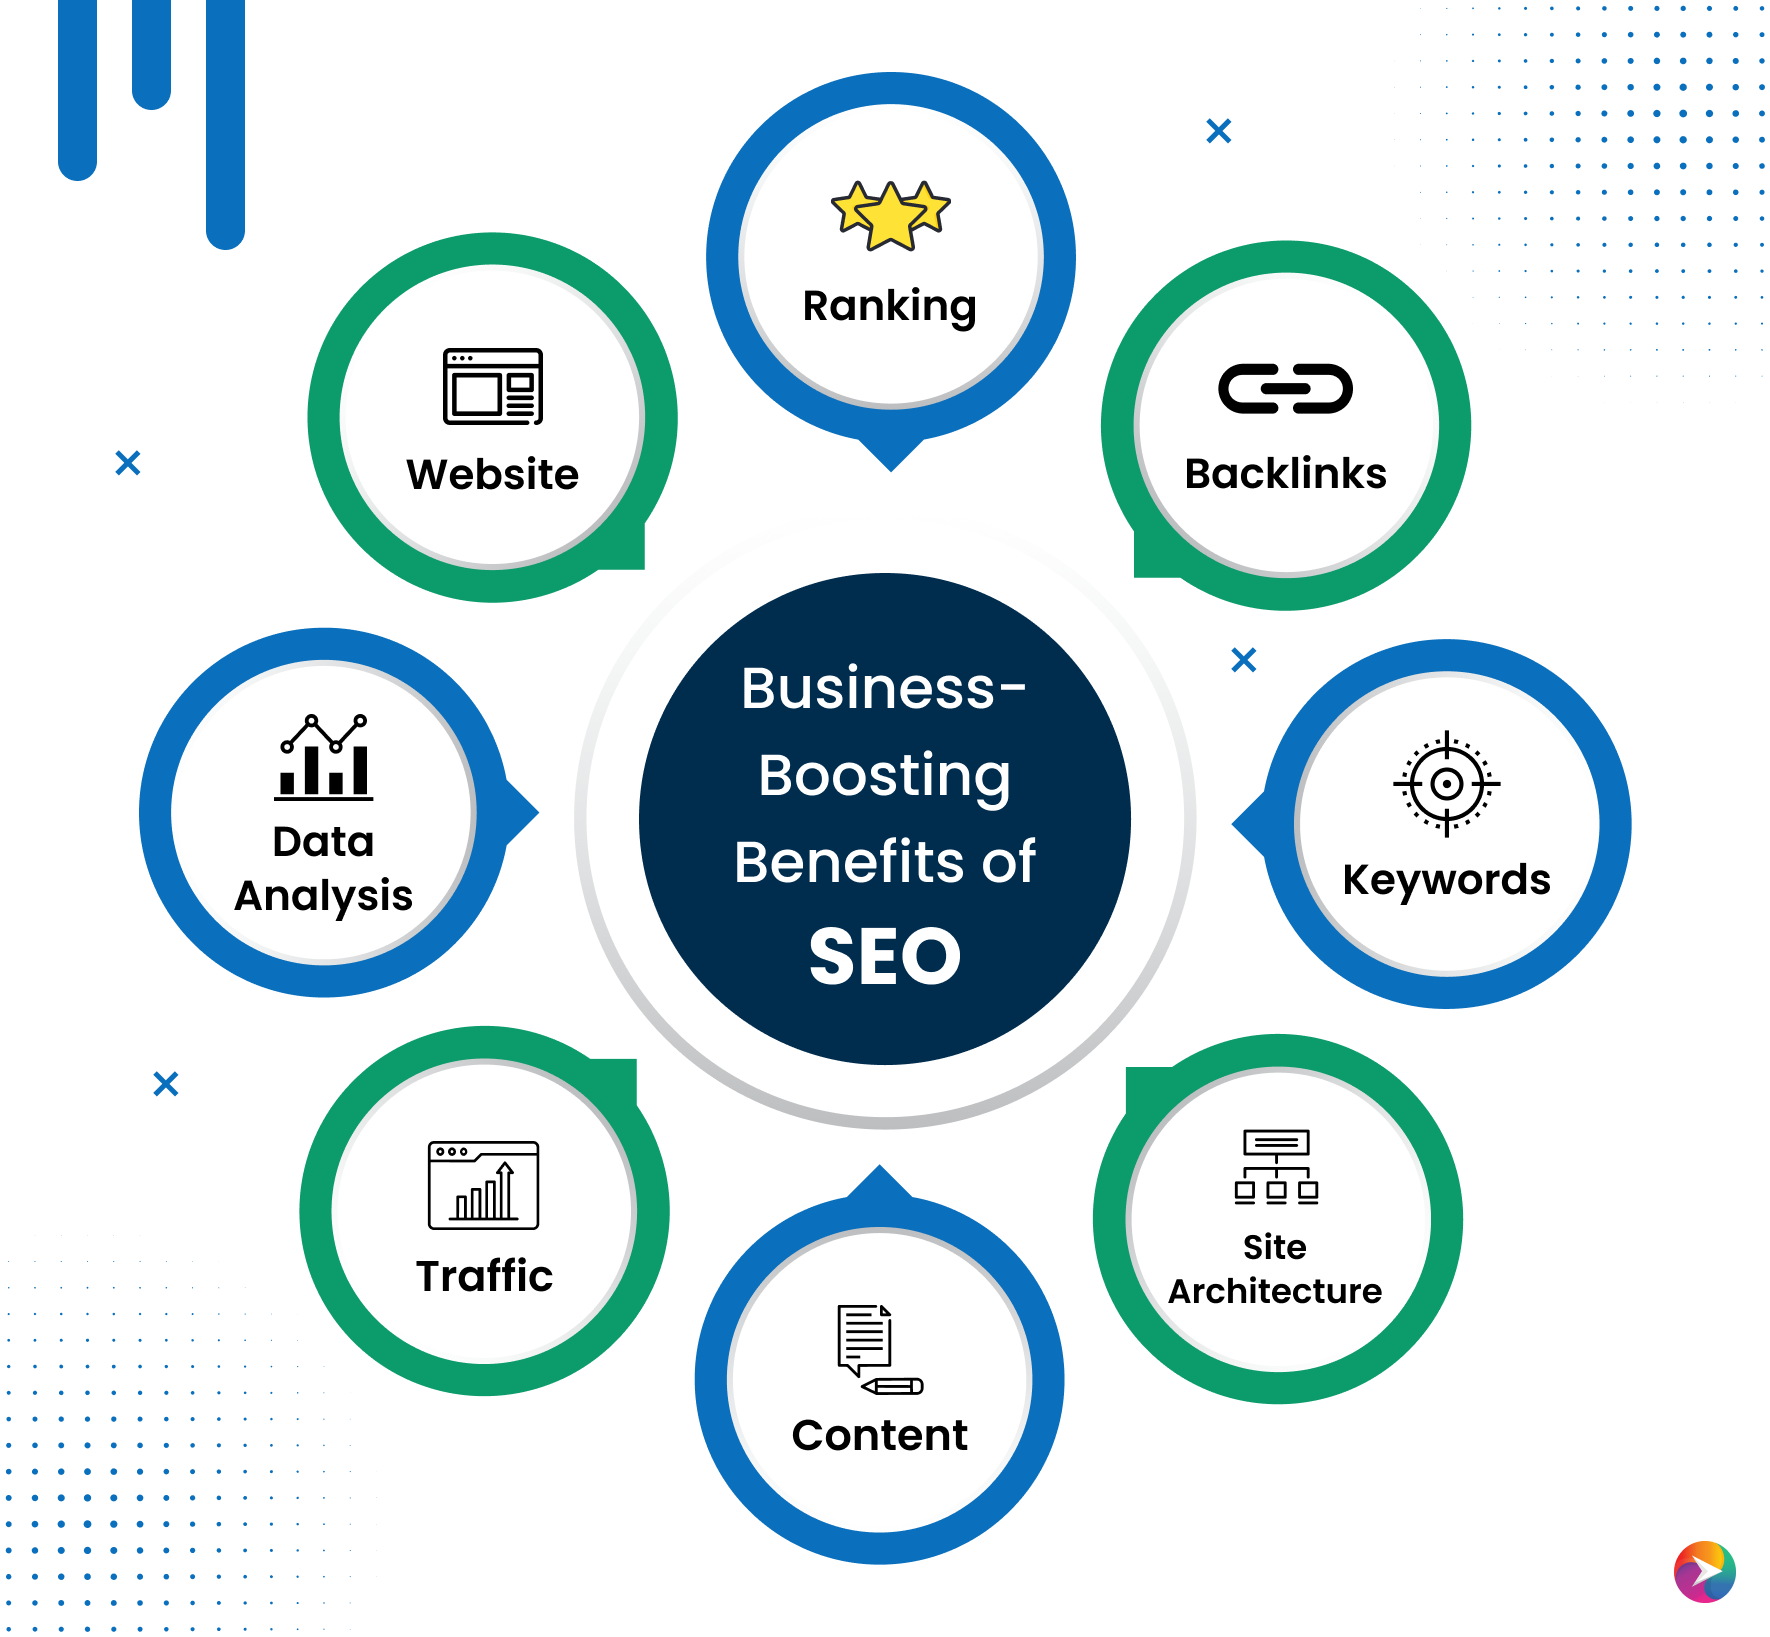 Business-Boosting Benefits of SEO